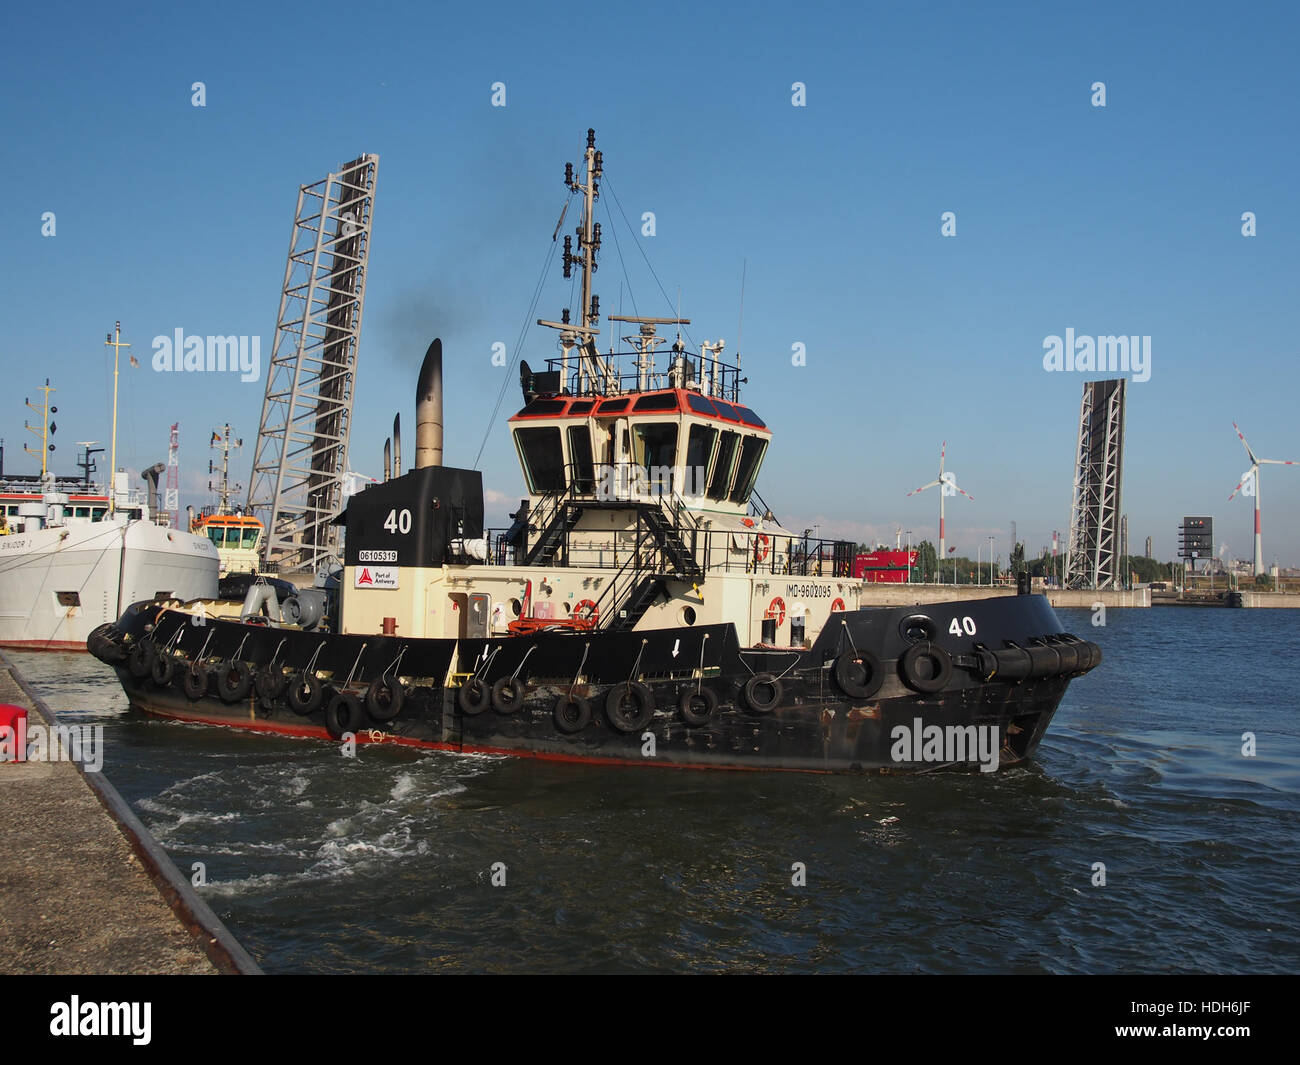 40 (tugboat, 2012) at the kai in front of the Berendrechtlock pic3 Stock Photo